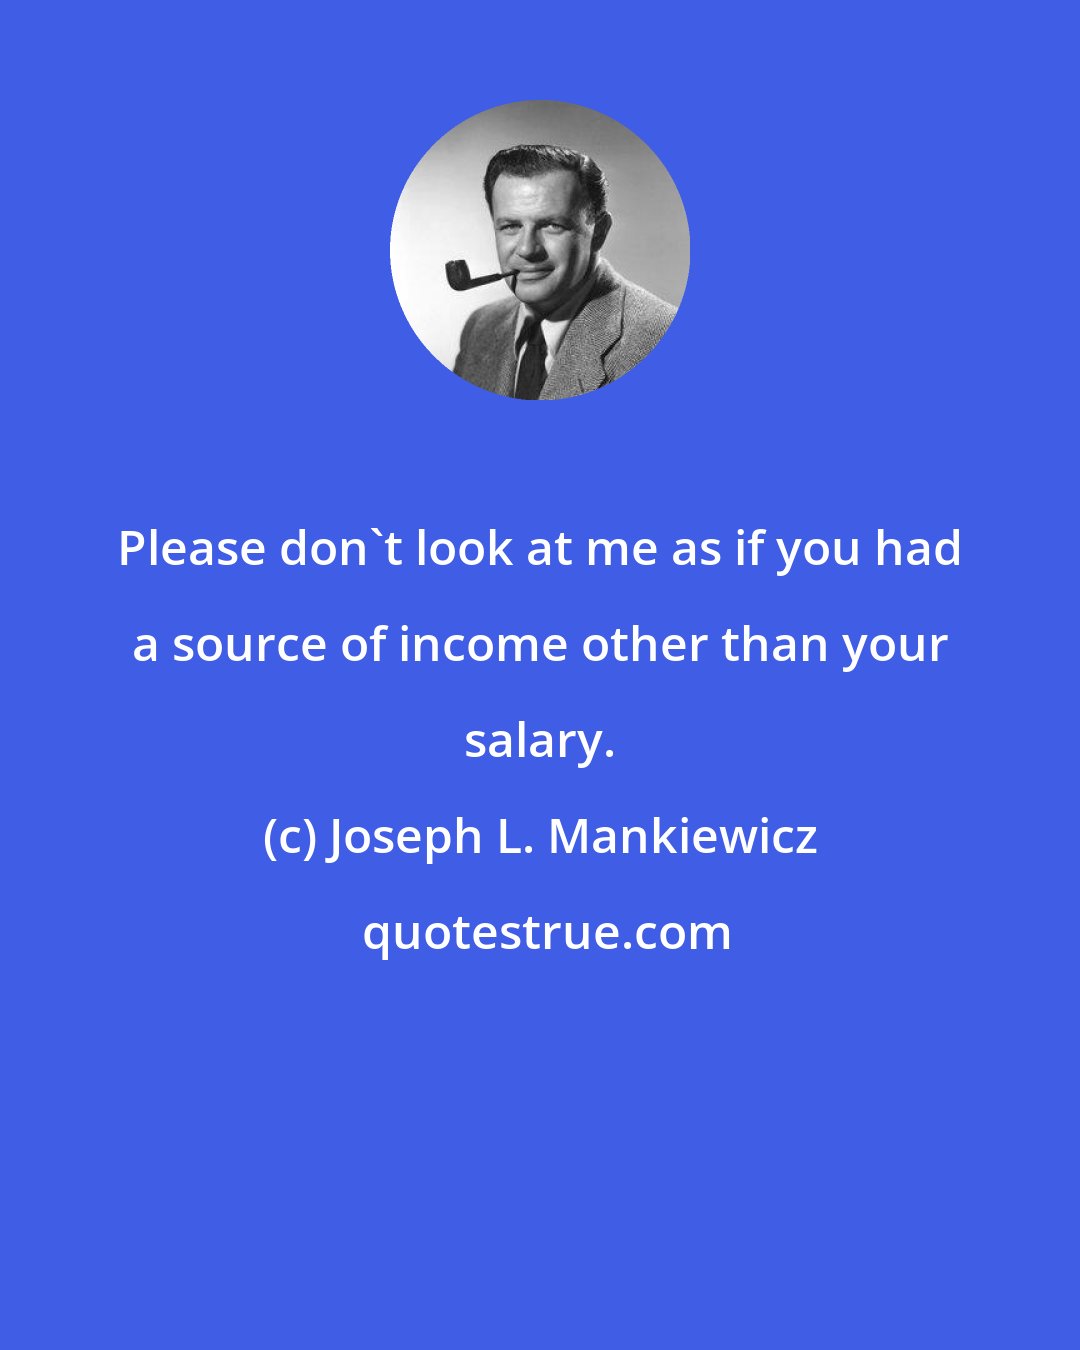 Joseph L. Mankiewicz: Please don't look at me as if you had a source of income other than your salary.